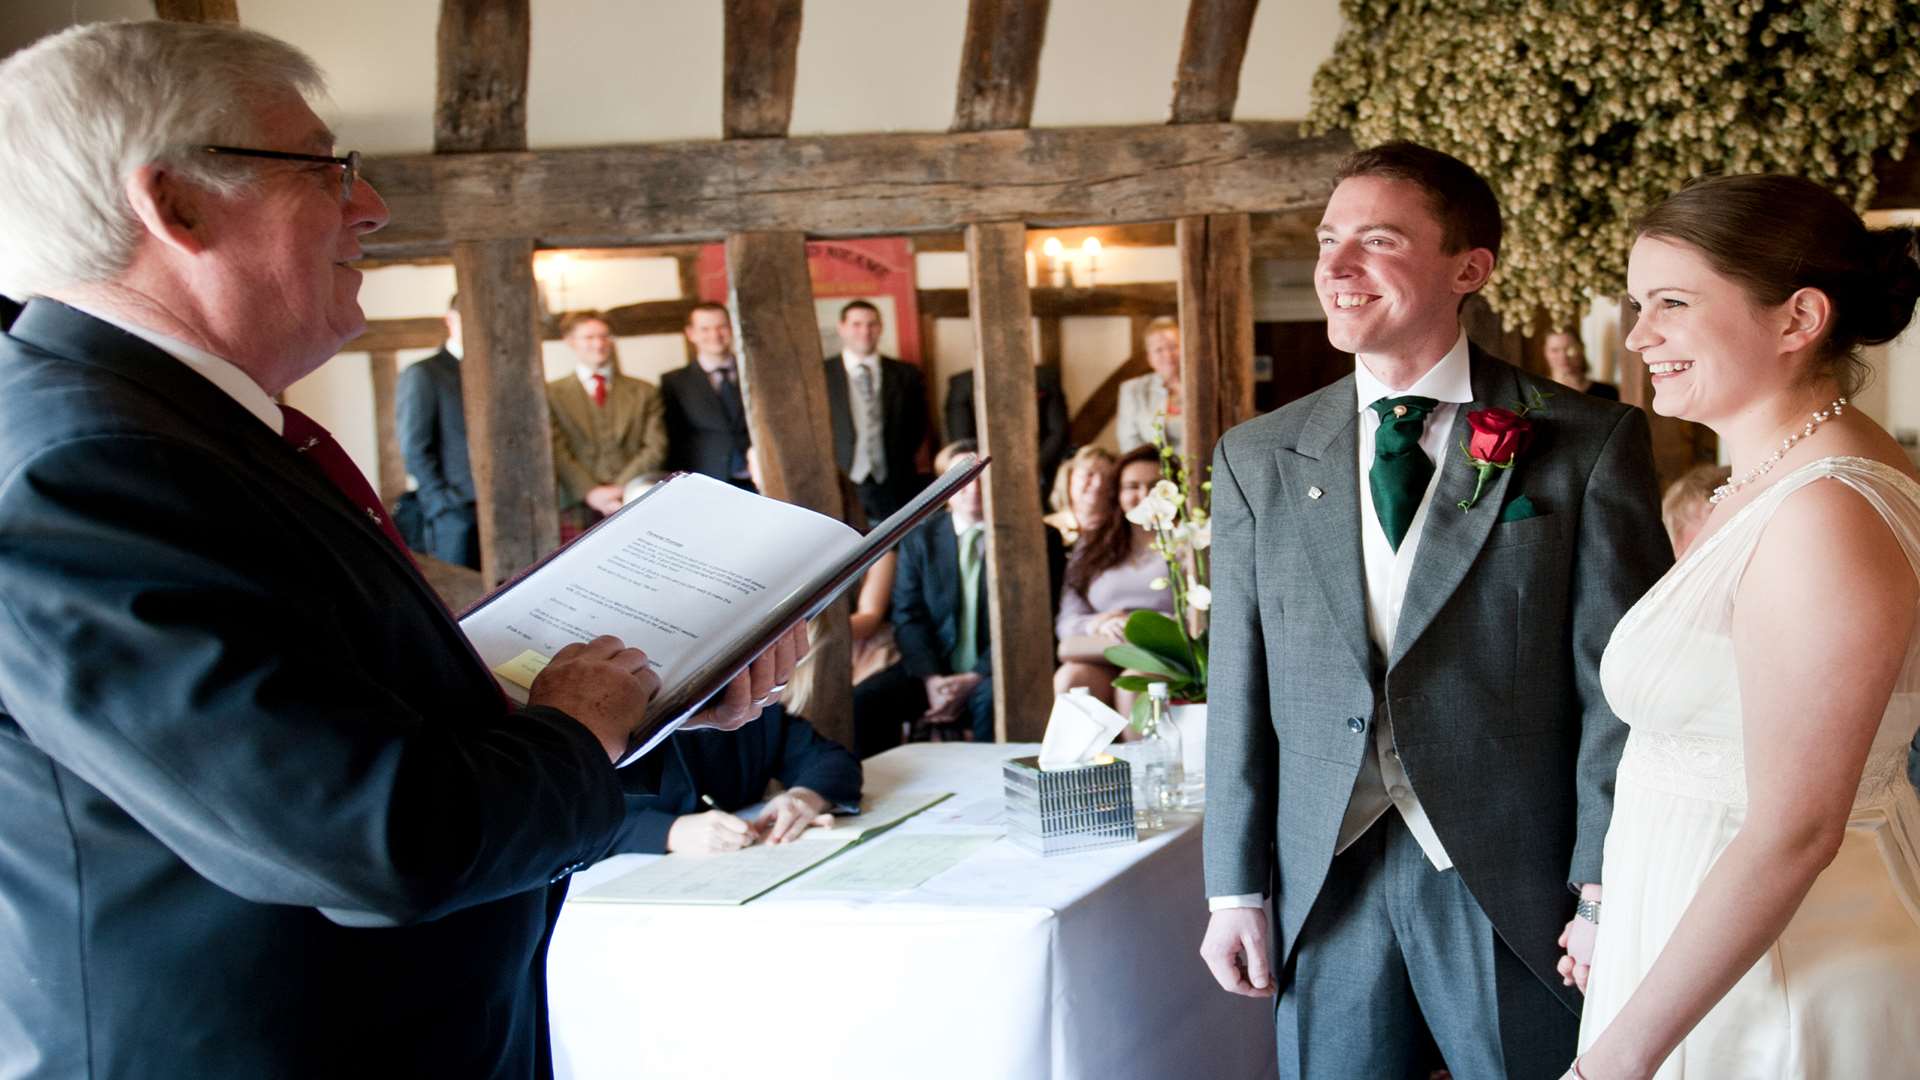 Couples can choose to get married at the Shepherd Neame Brewery